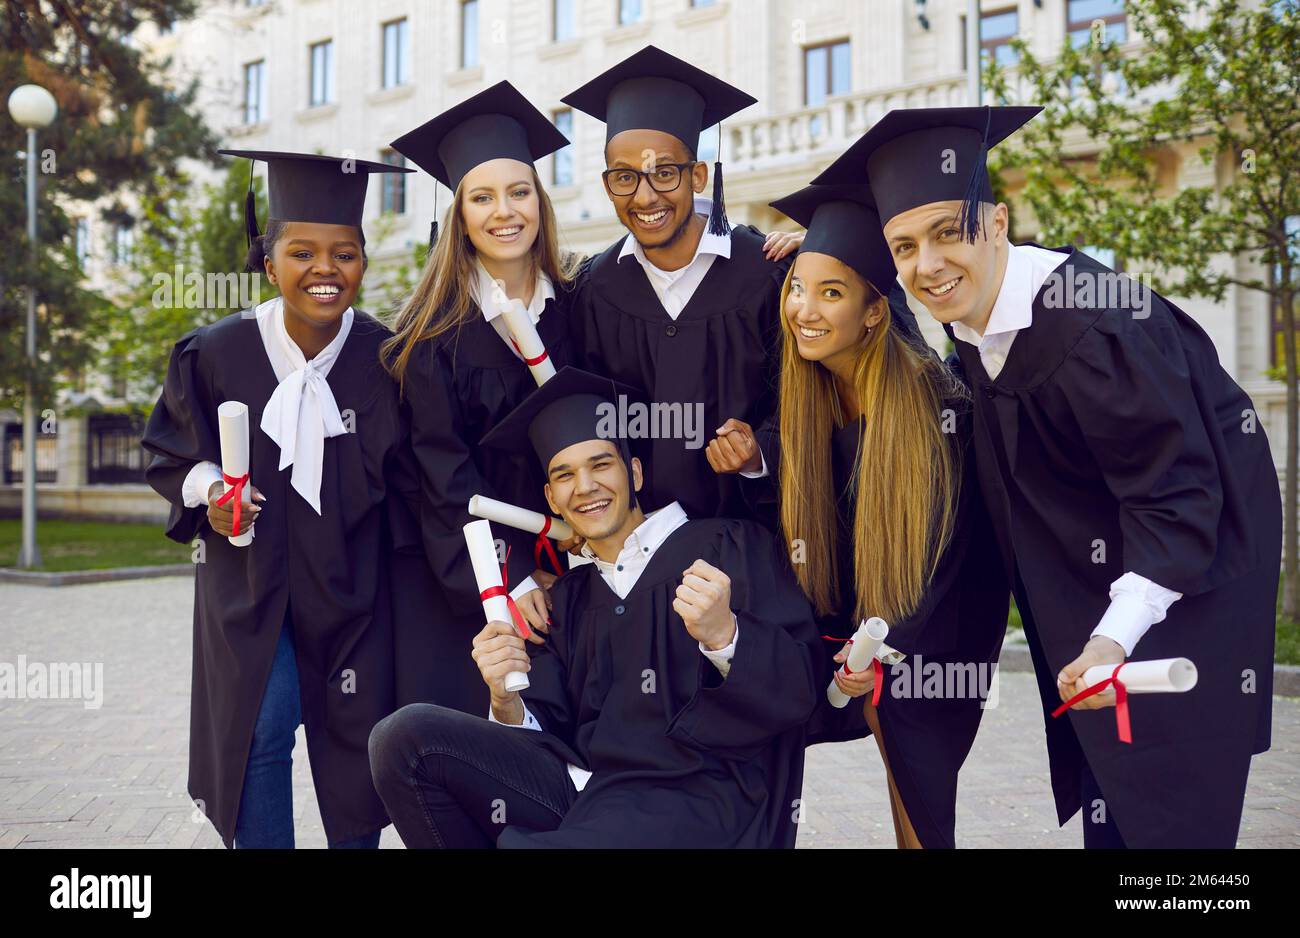 Happy university graduates in academic caps and gowns having fun on graduation day Stock Photo